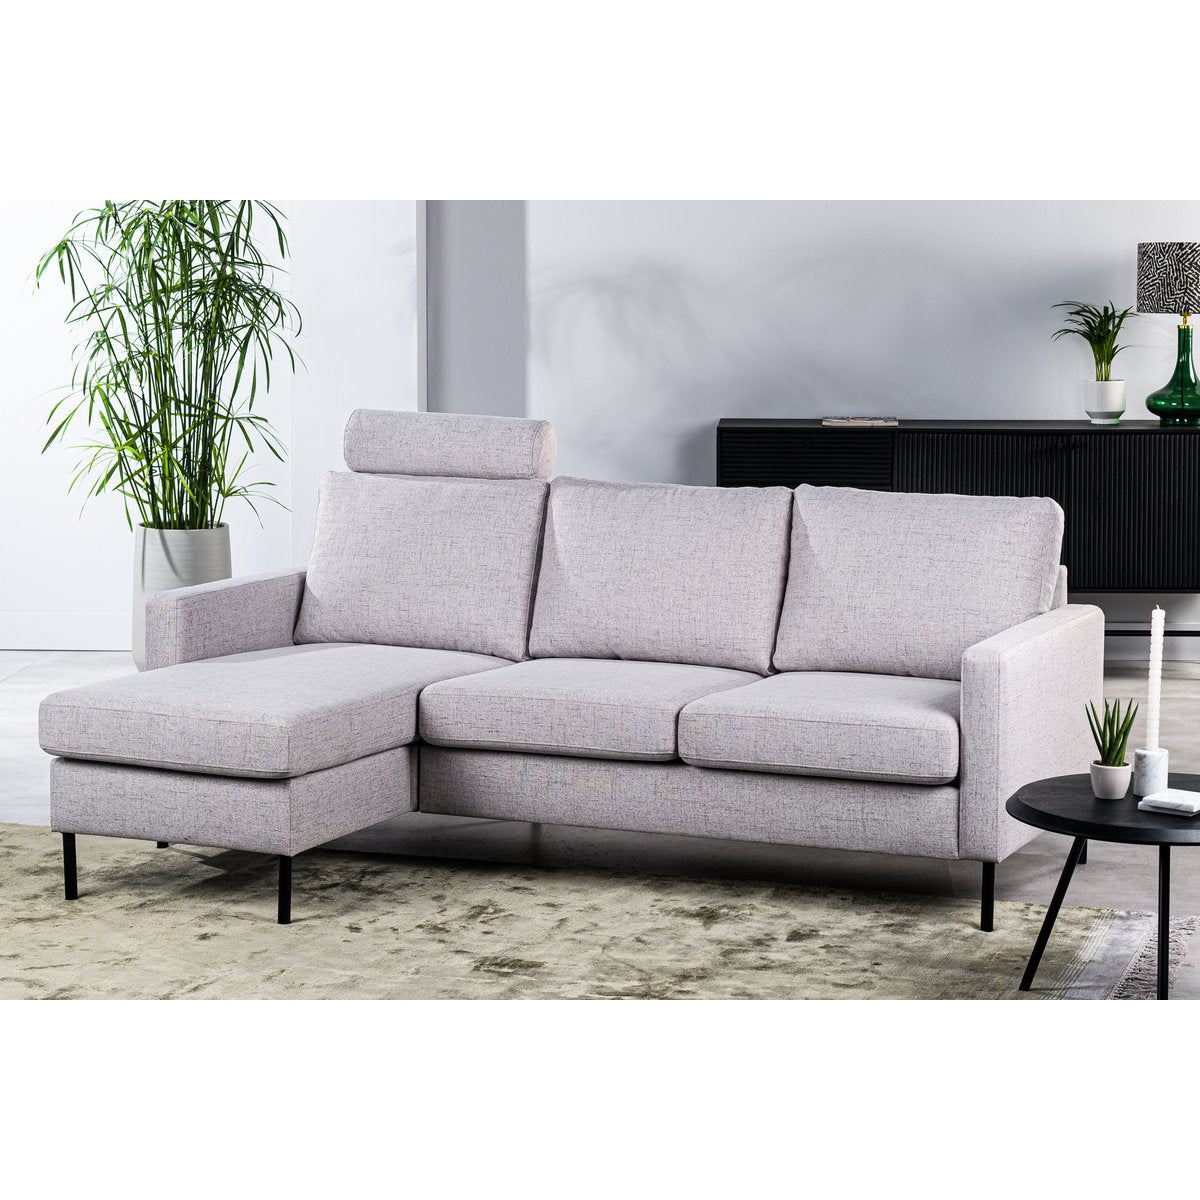 3 seater sofa CL L+R, with headrest, fabric Valente, V311 gray